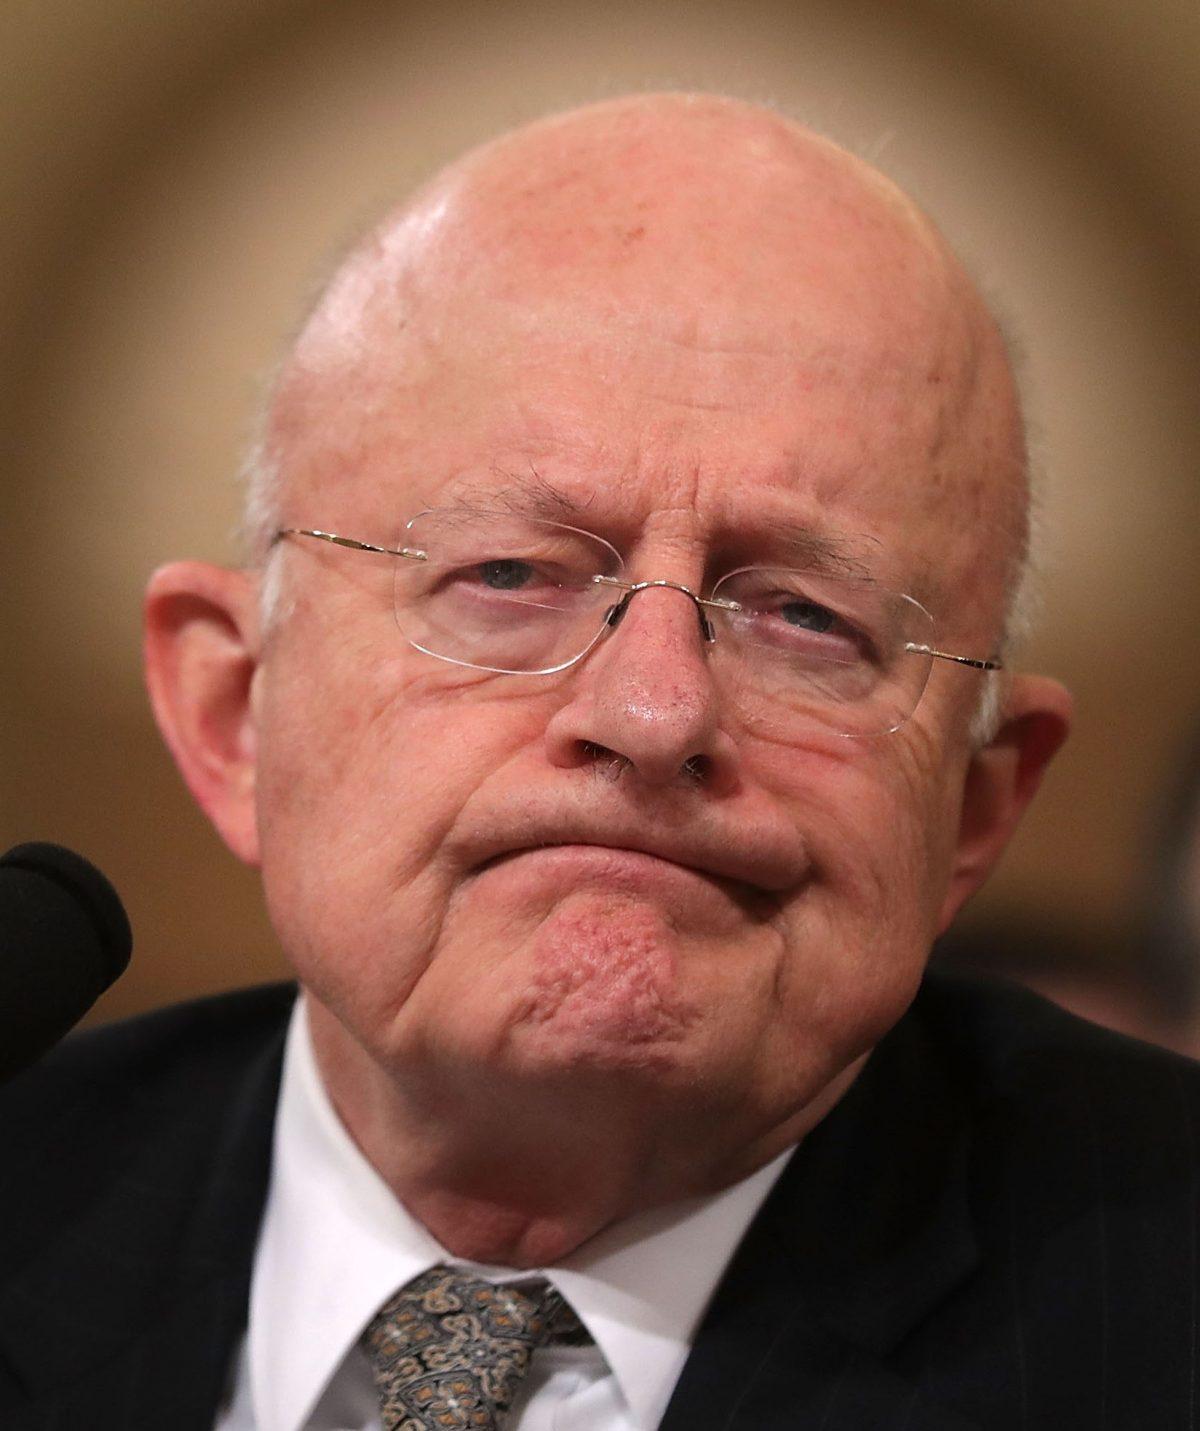 Director of National Intelligence James Clapper on Nov. 17, 2016. Clapper leaked information to CNN, after which he publicly condemned the leaks. (Alex Wong/Getty Images)